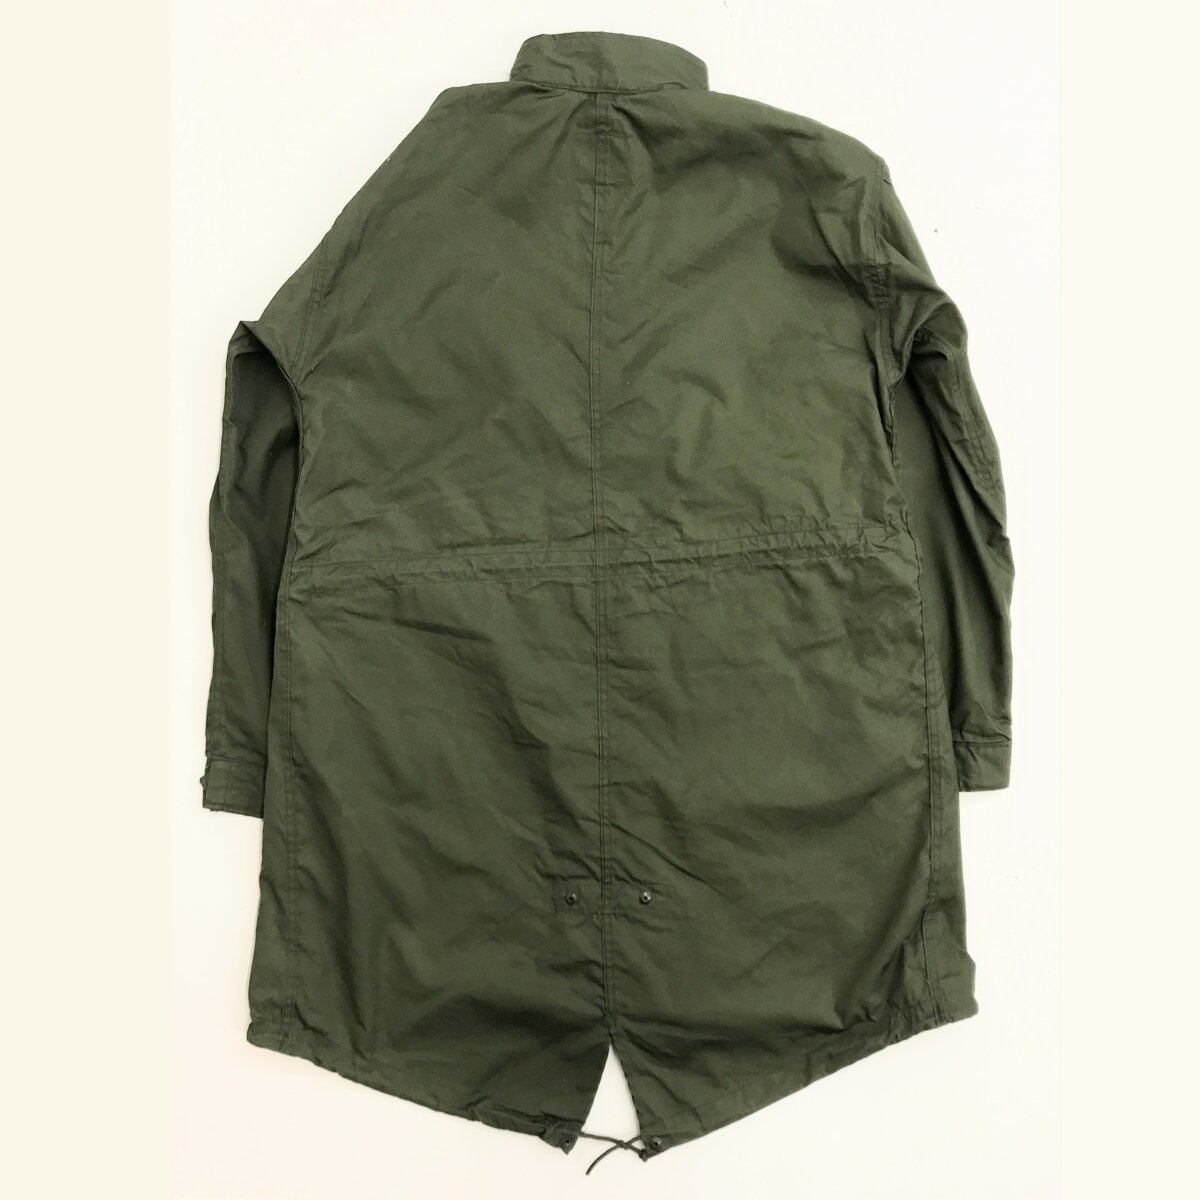 U.S.ARMY 70年代 PARKA EXTREME COLD WEATHER M-65 FISHTAIL PARKA